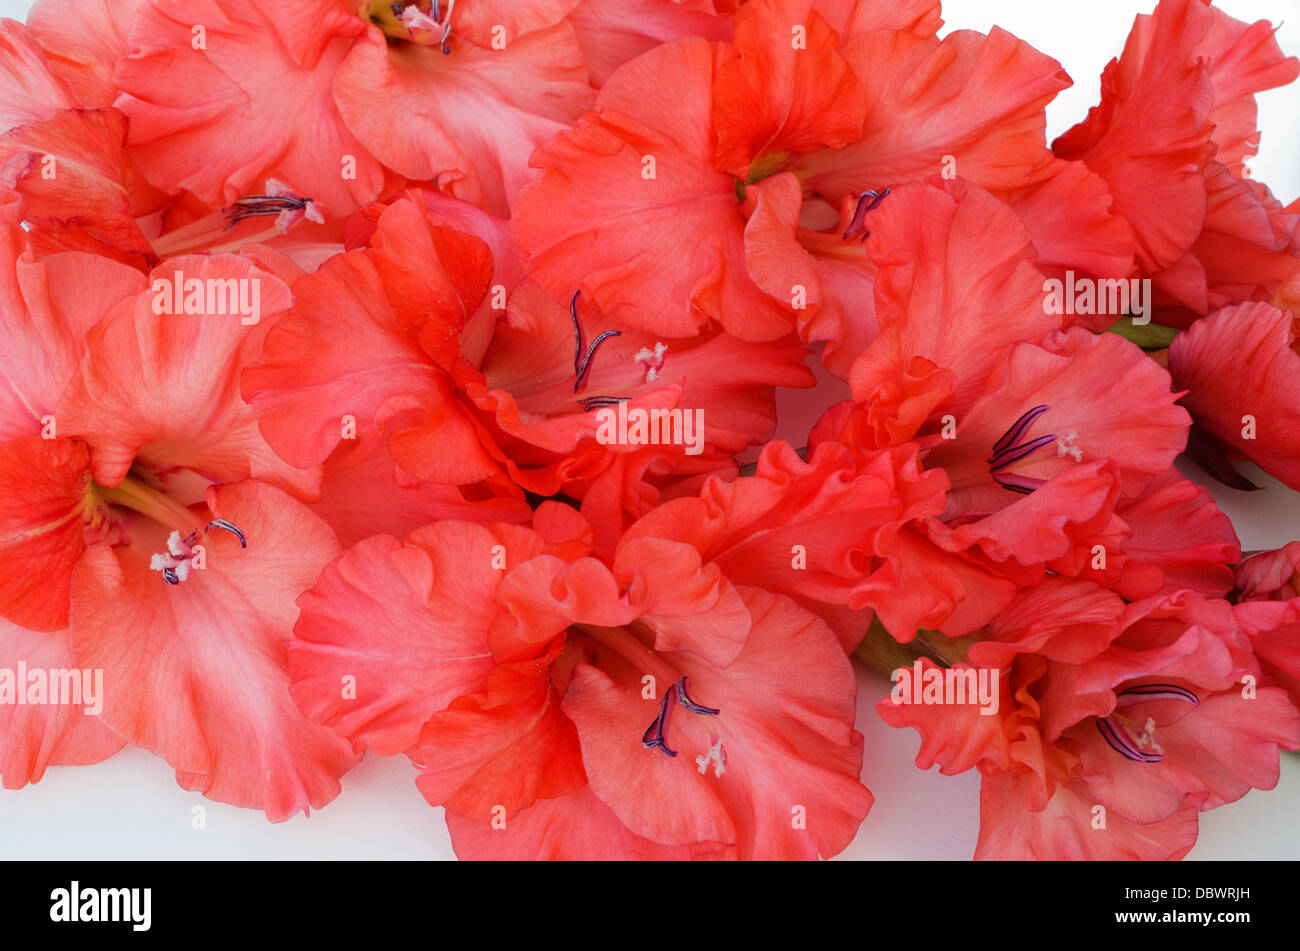 corrugated, pleated, scarlet gladiolus in a white background Stock Photo